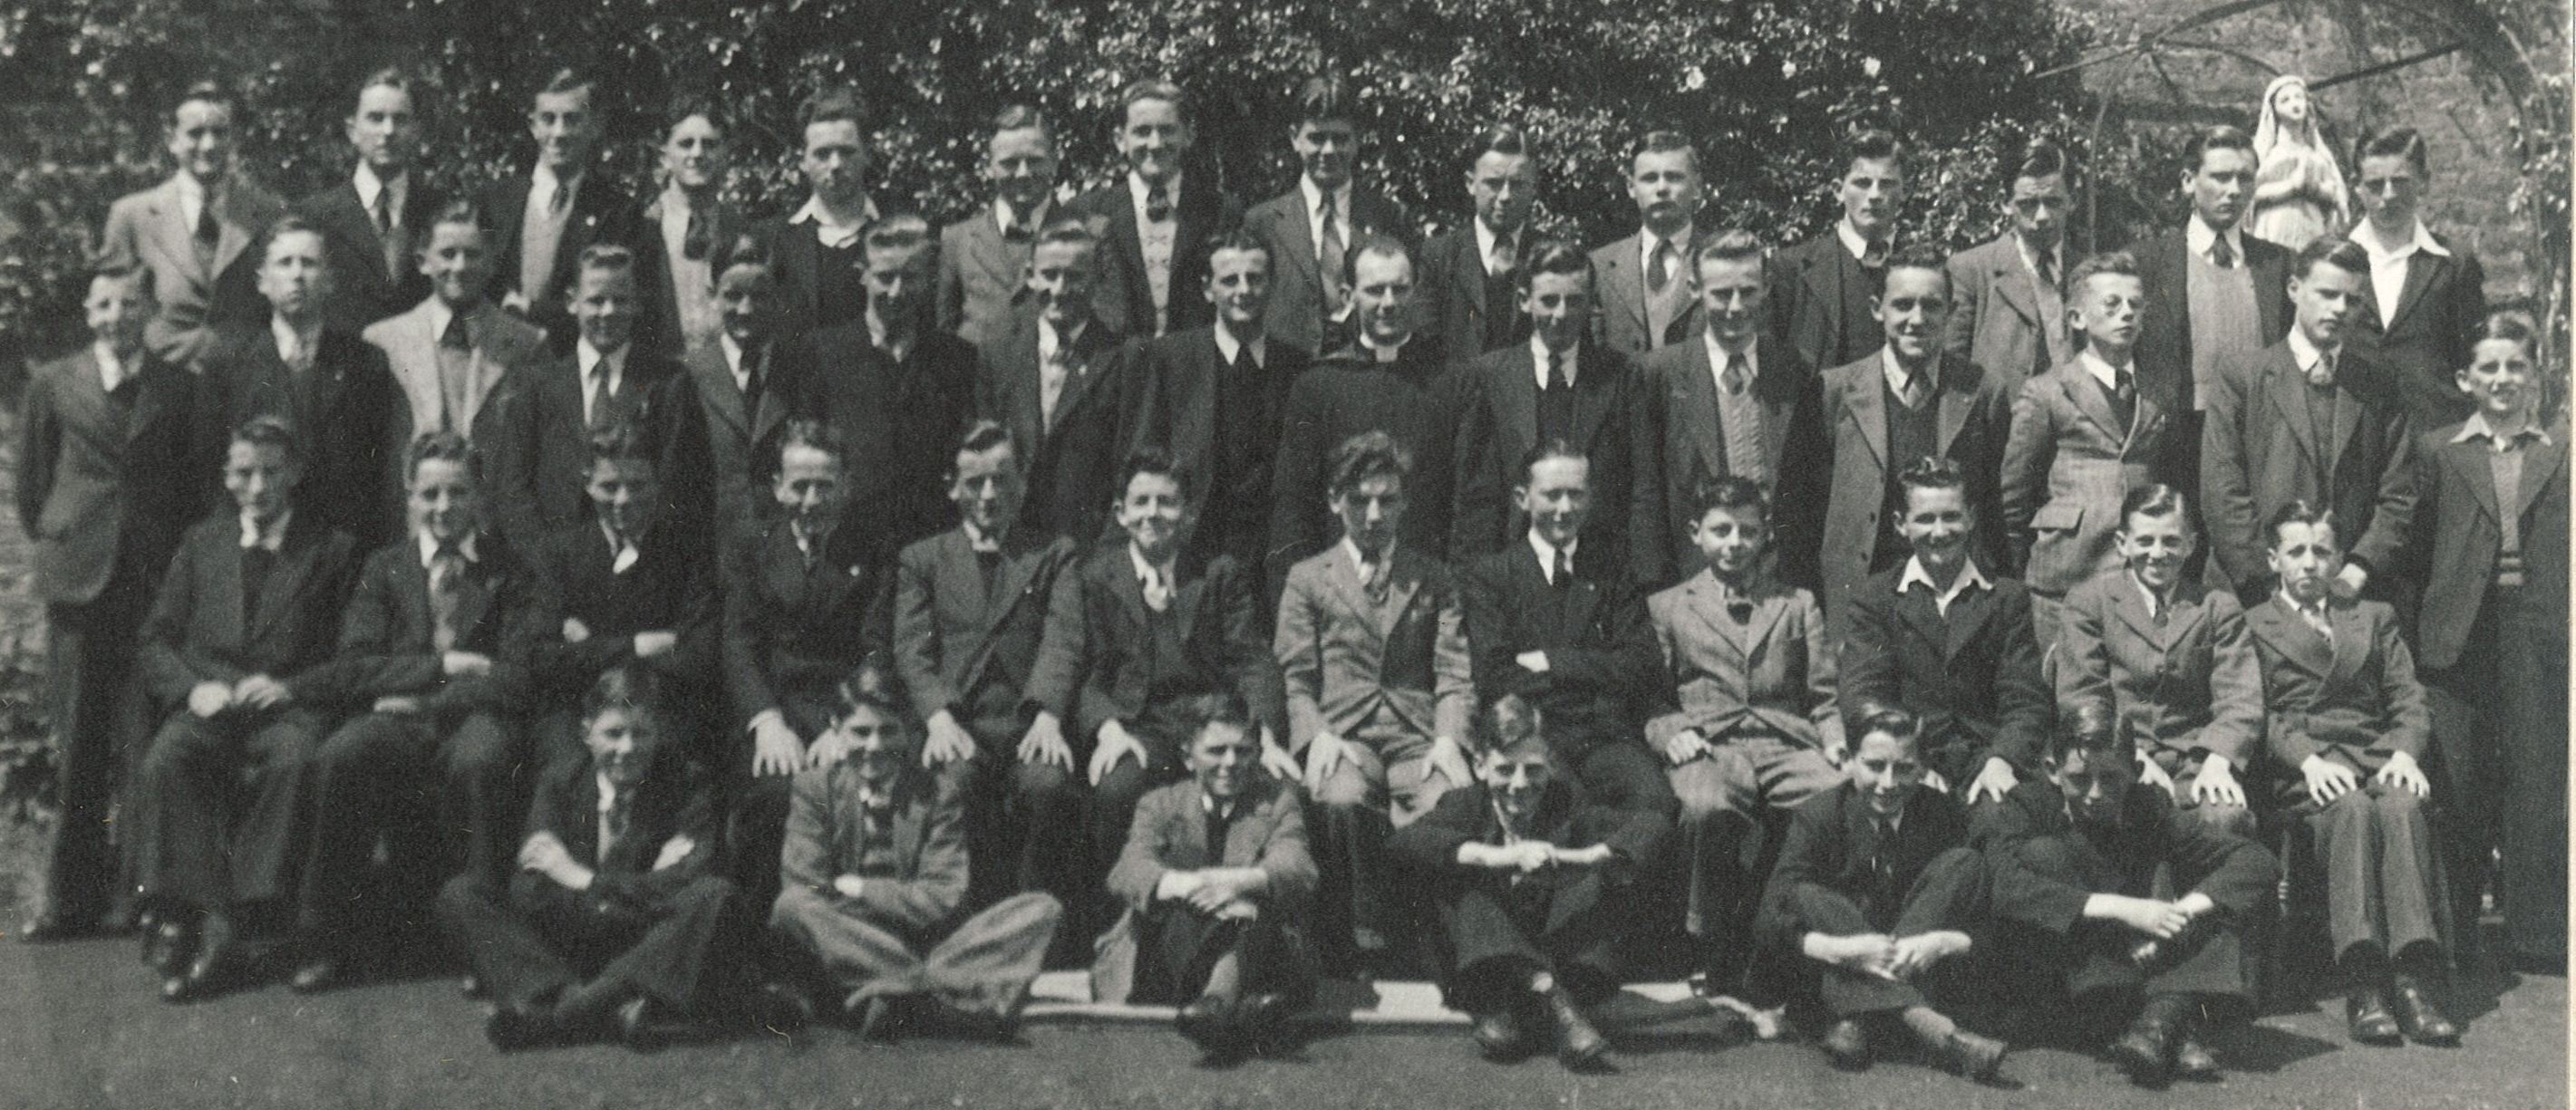 an old po of men in suits and ties